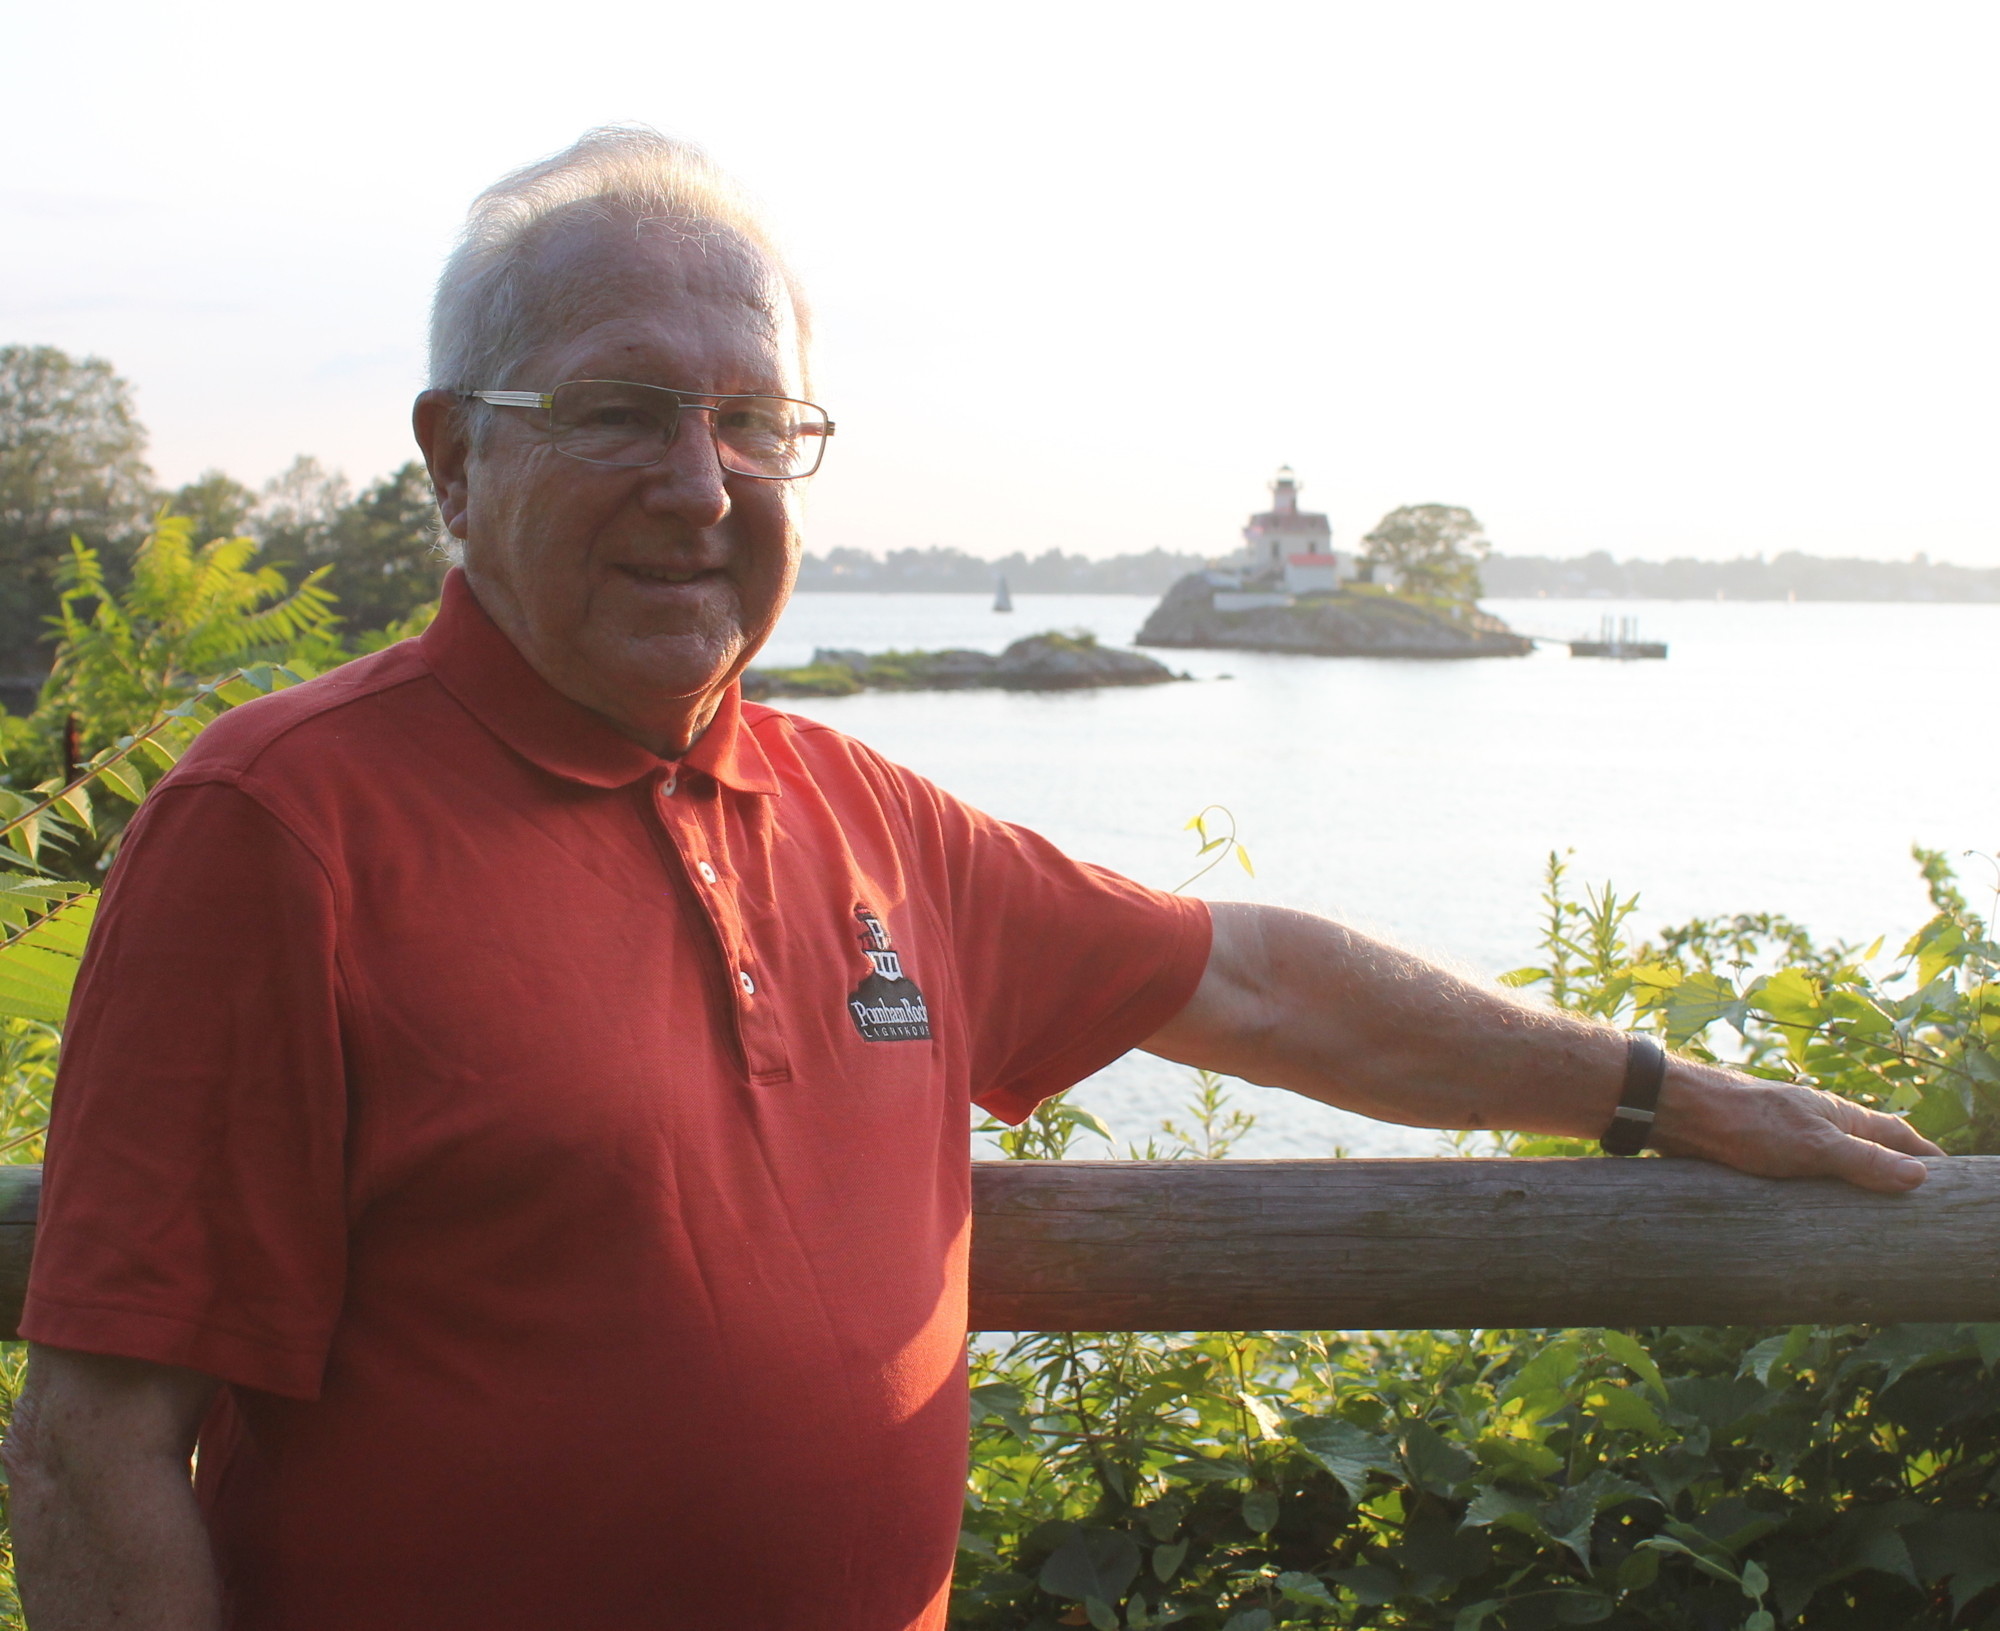 Noted city resident Dave Kelleher, a founding member of the Friends of Pomham Rocks Lighthouse organization, is one of many interested in seeing the renovation and preservation of the historic structure continue well into the future.